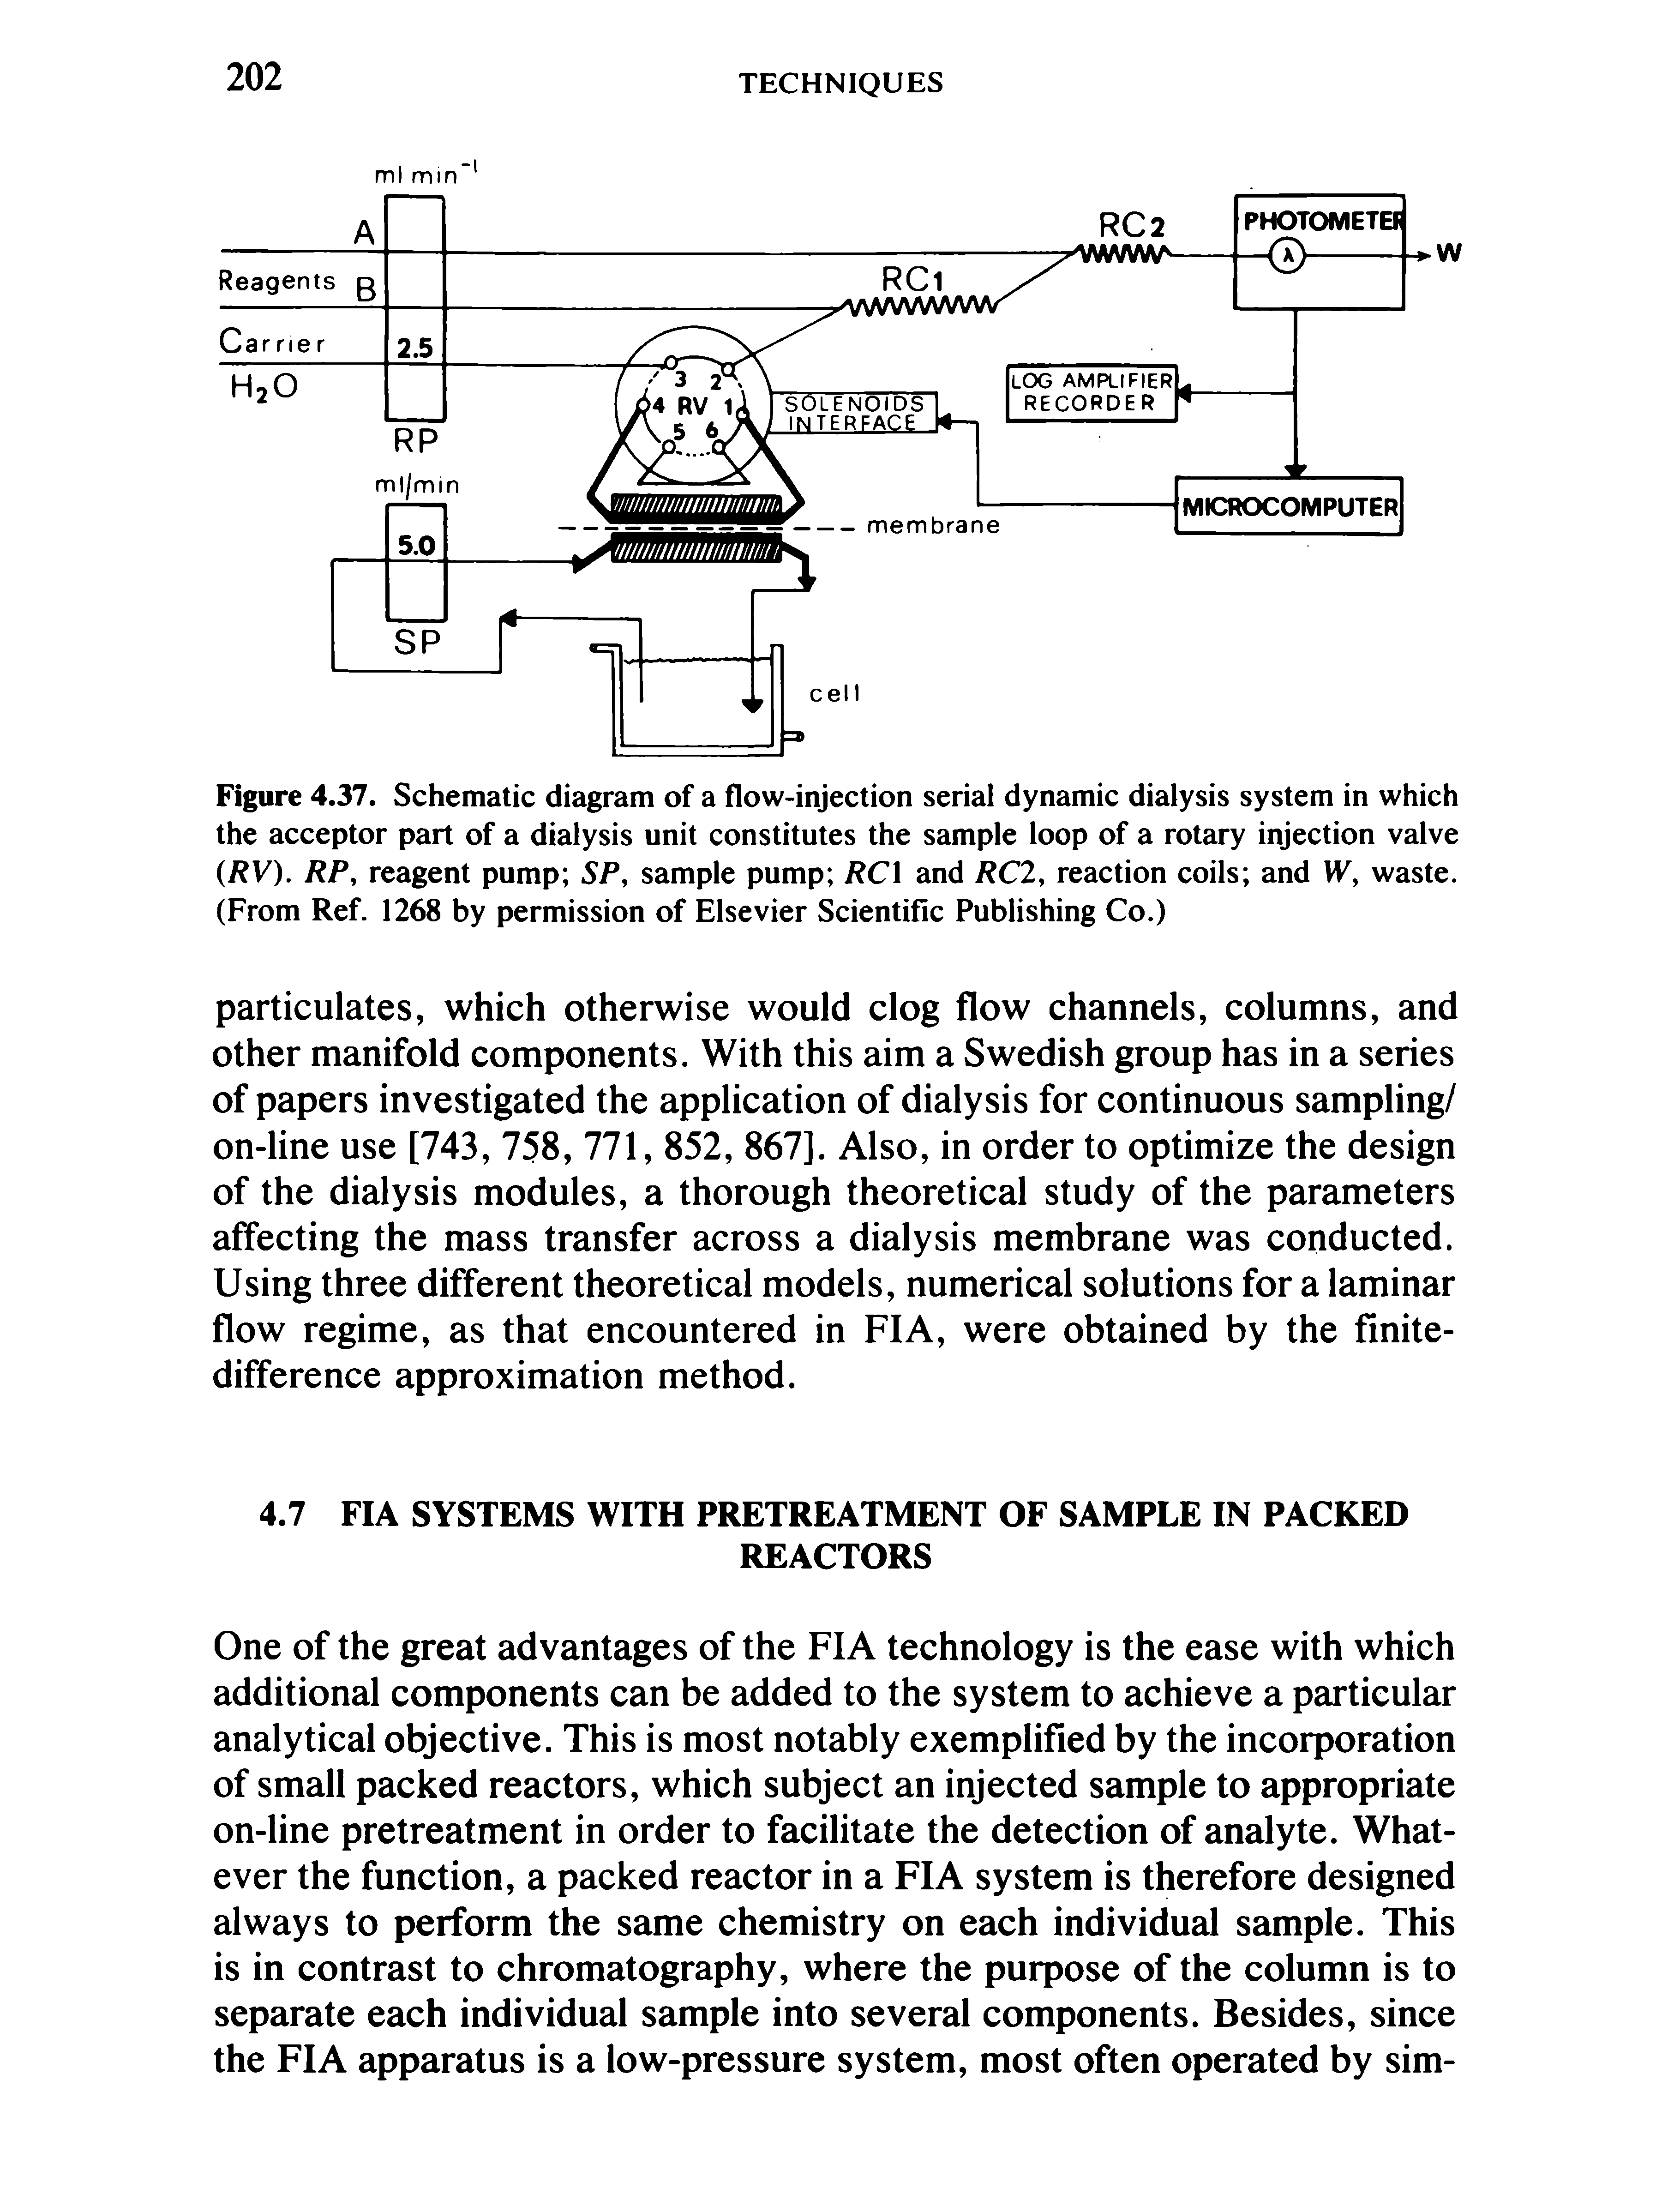 Figure 4.37. Schematic diagram of a flow-injection serial dynamic dialysis system in which the acceptor part of a dialysis unit constitutes the sample loop of a rotary injection valve (RV). RP, reagent pump SP, sample pump RCl and RC2, reaction coils and W, waste. (From Ref. 1268 by permission of Elsevier Scientific Publishing Co.)...